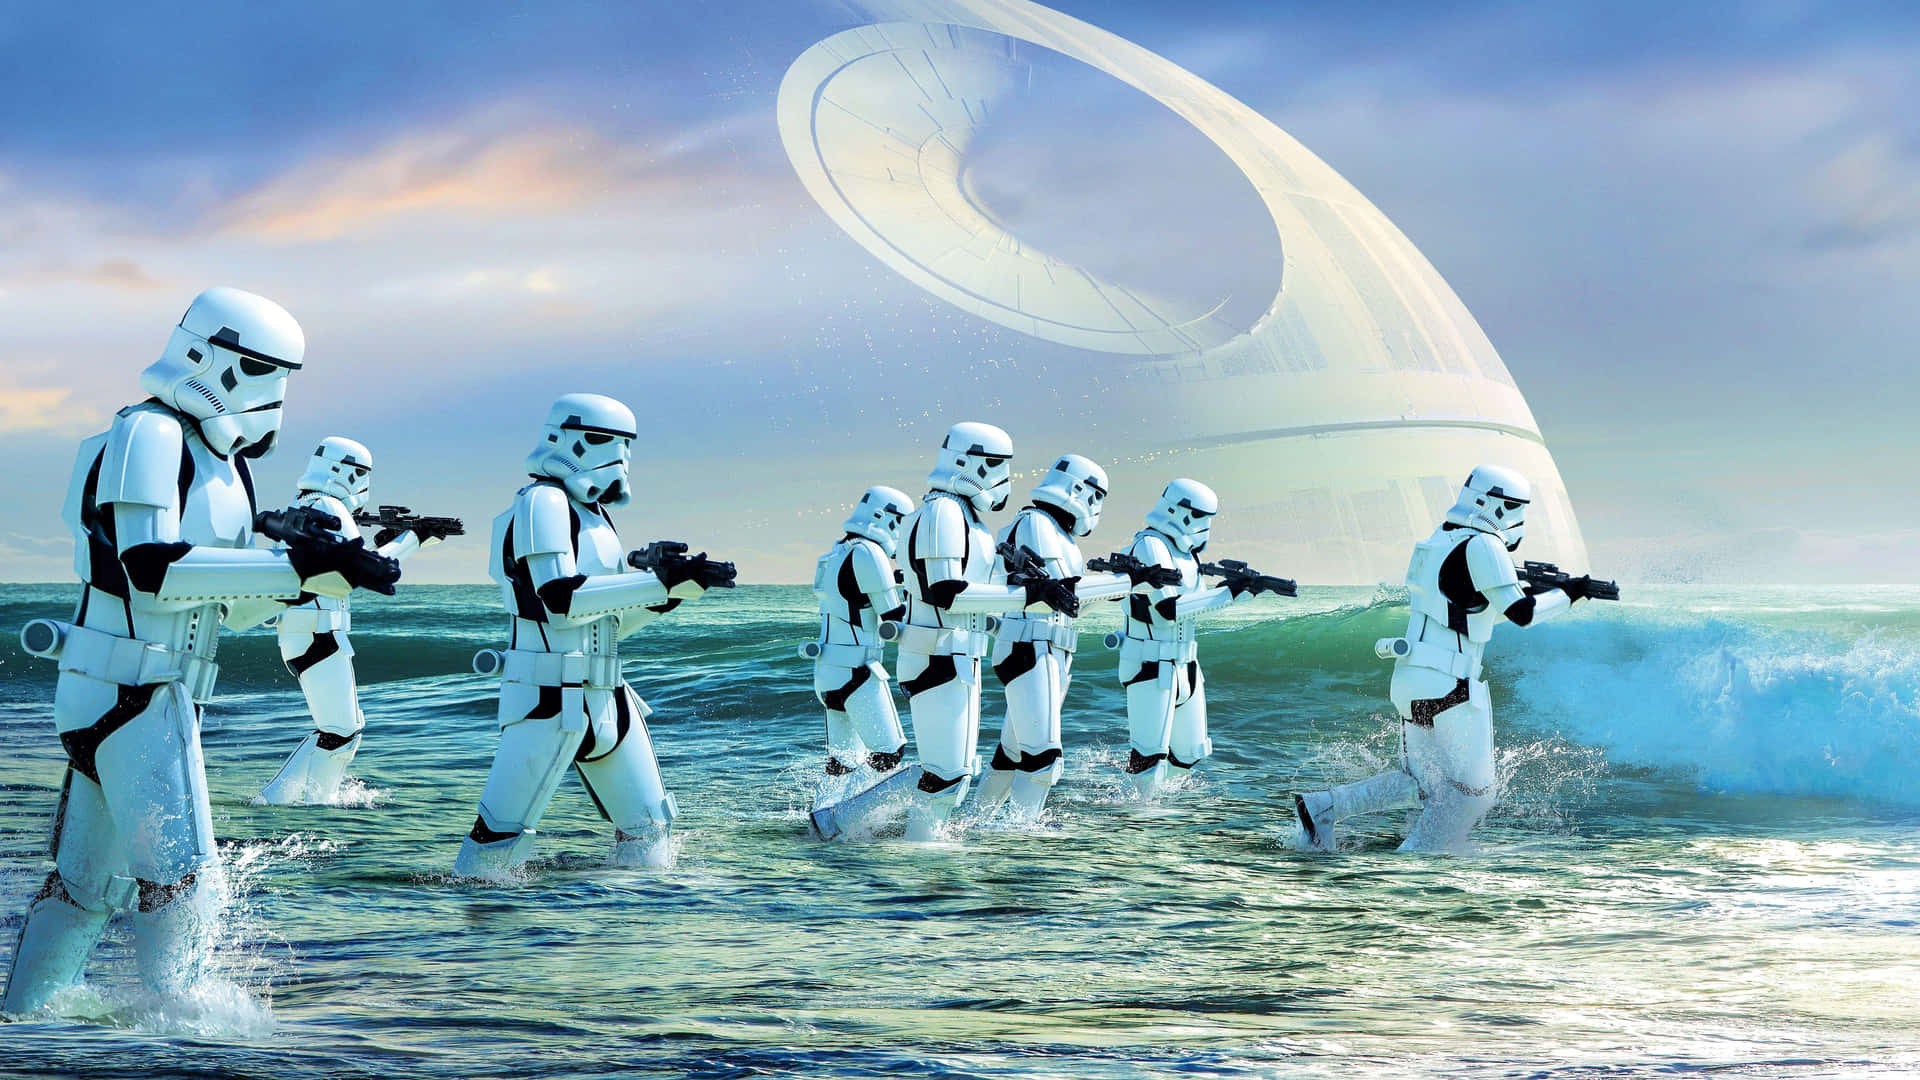 Imperial Forces on the paradise planet Scarif Wallpaper